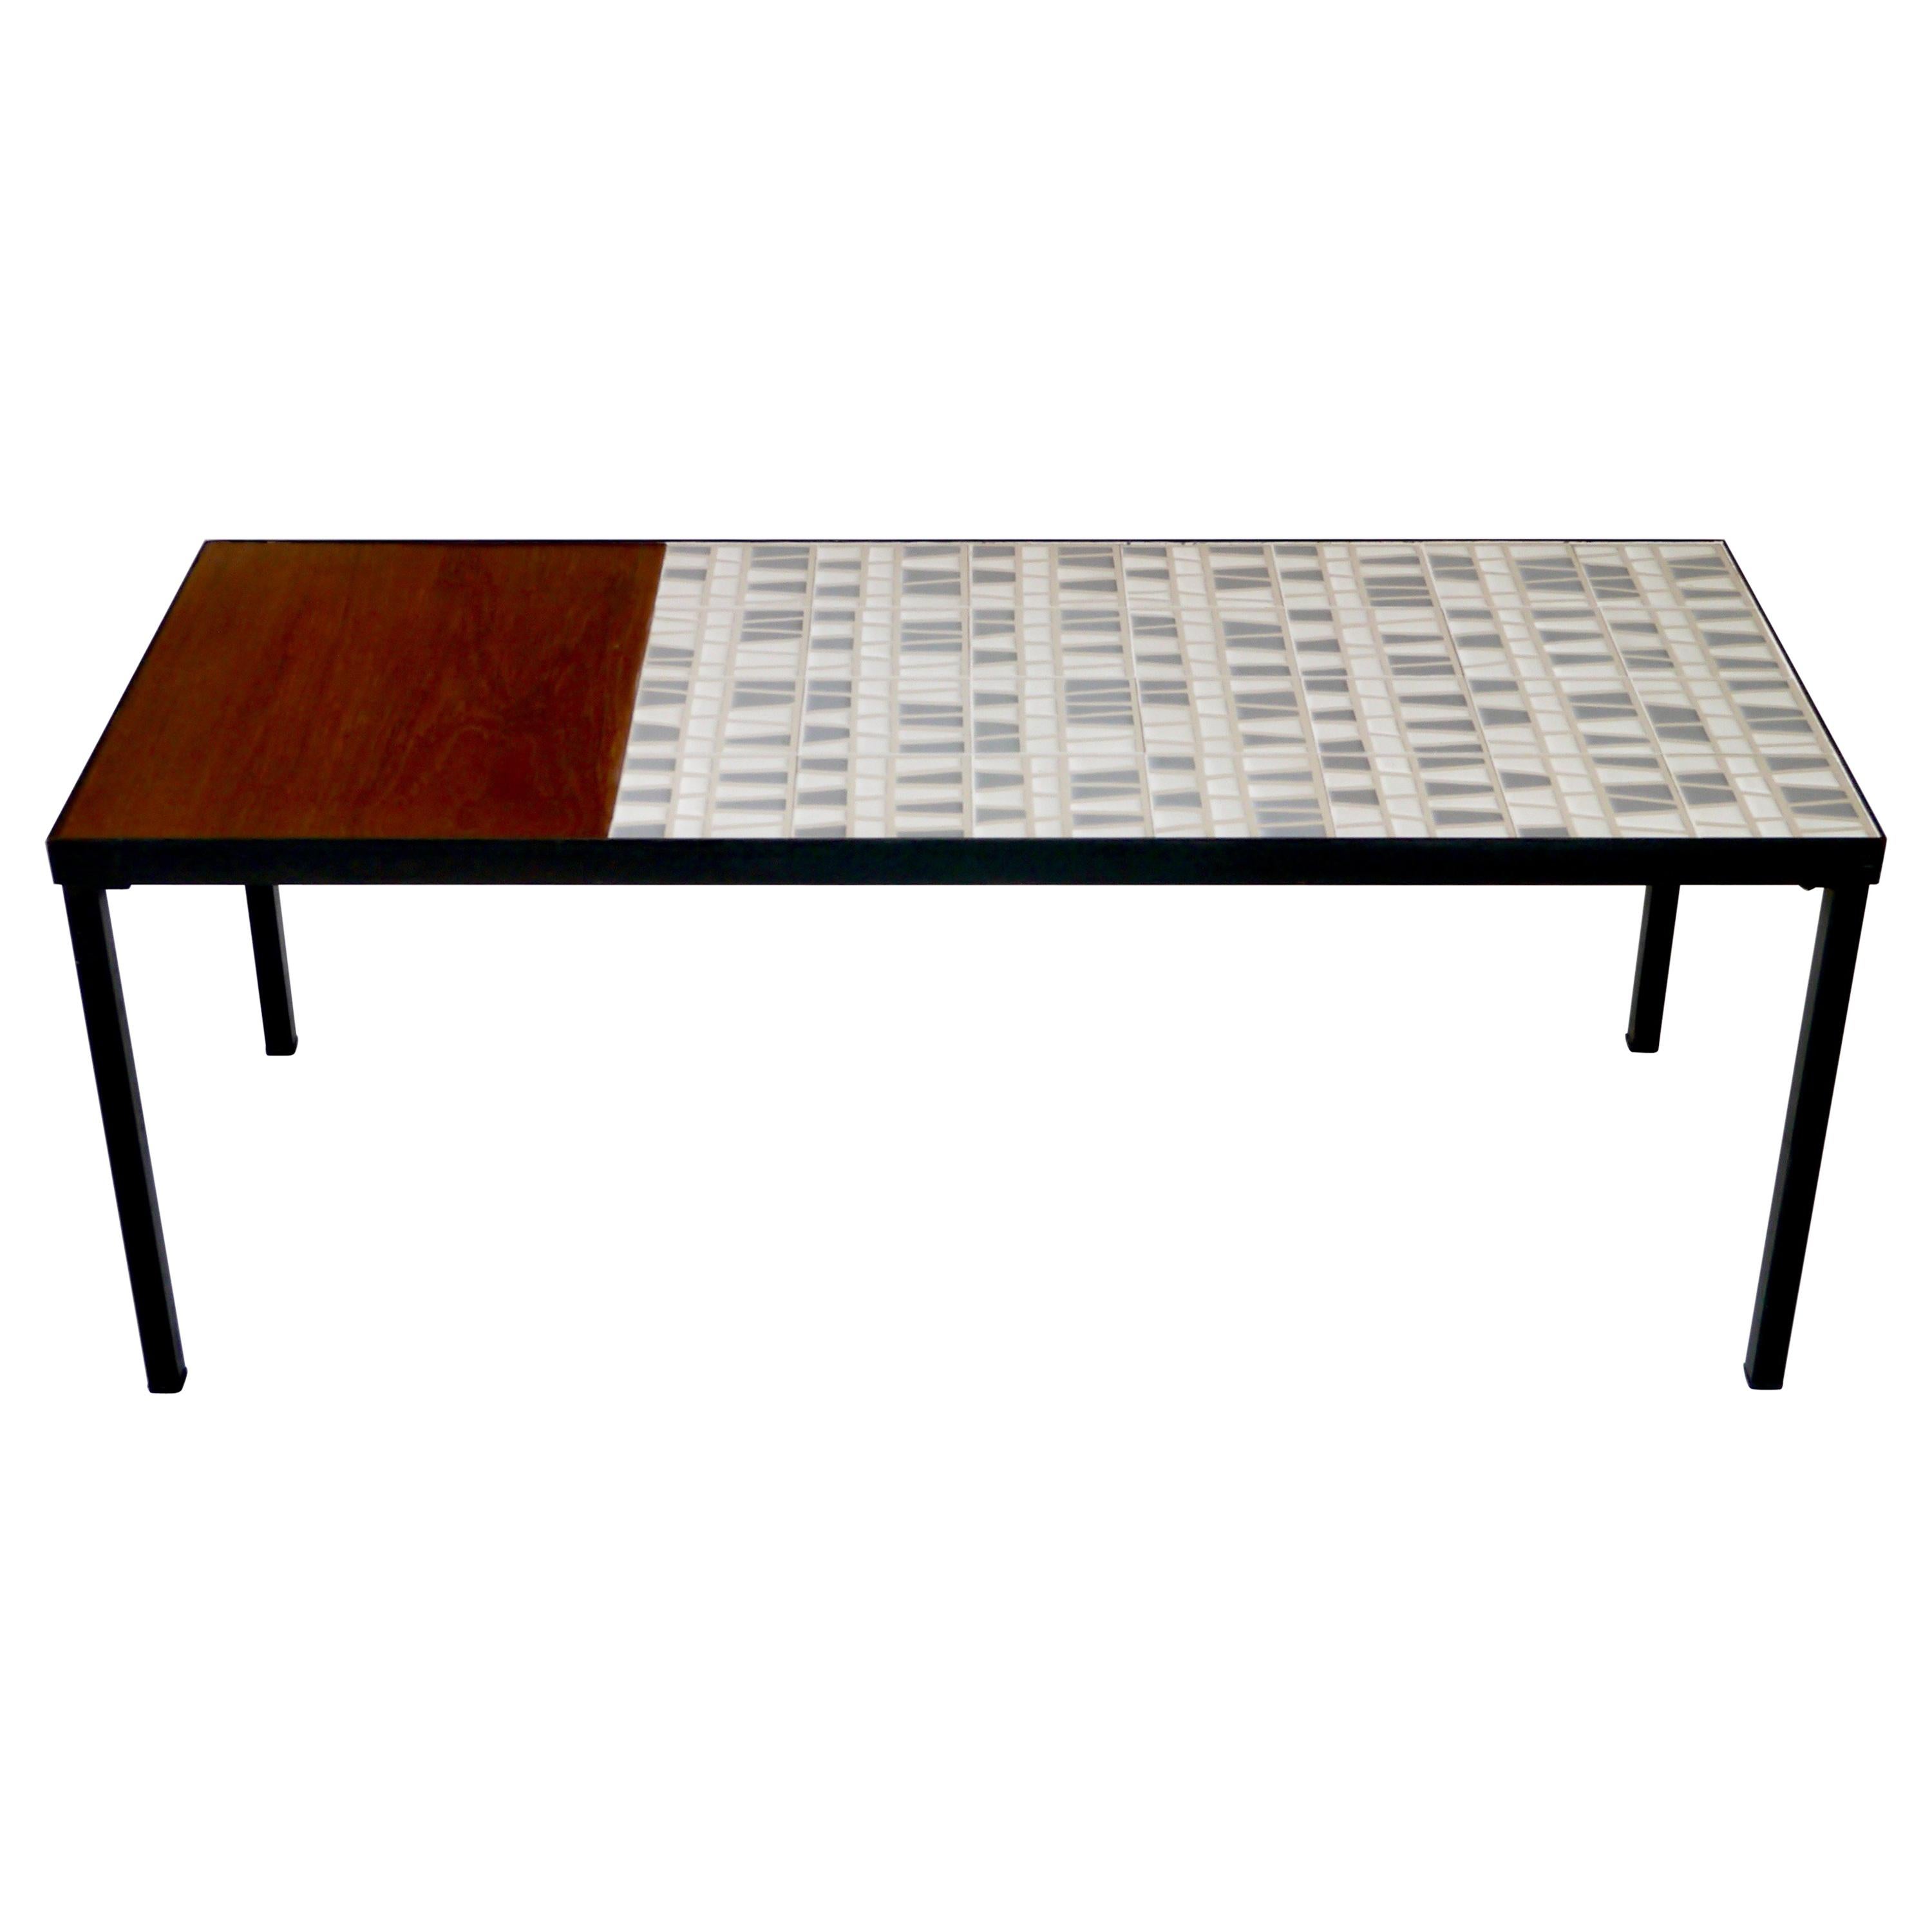 Roger Capron, Iconic Low Table, Vallauris, France, circa 1960 im Angebot